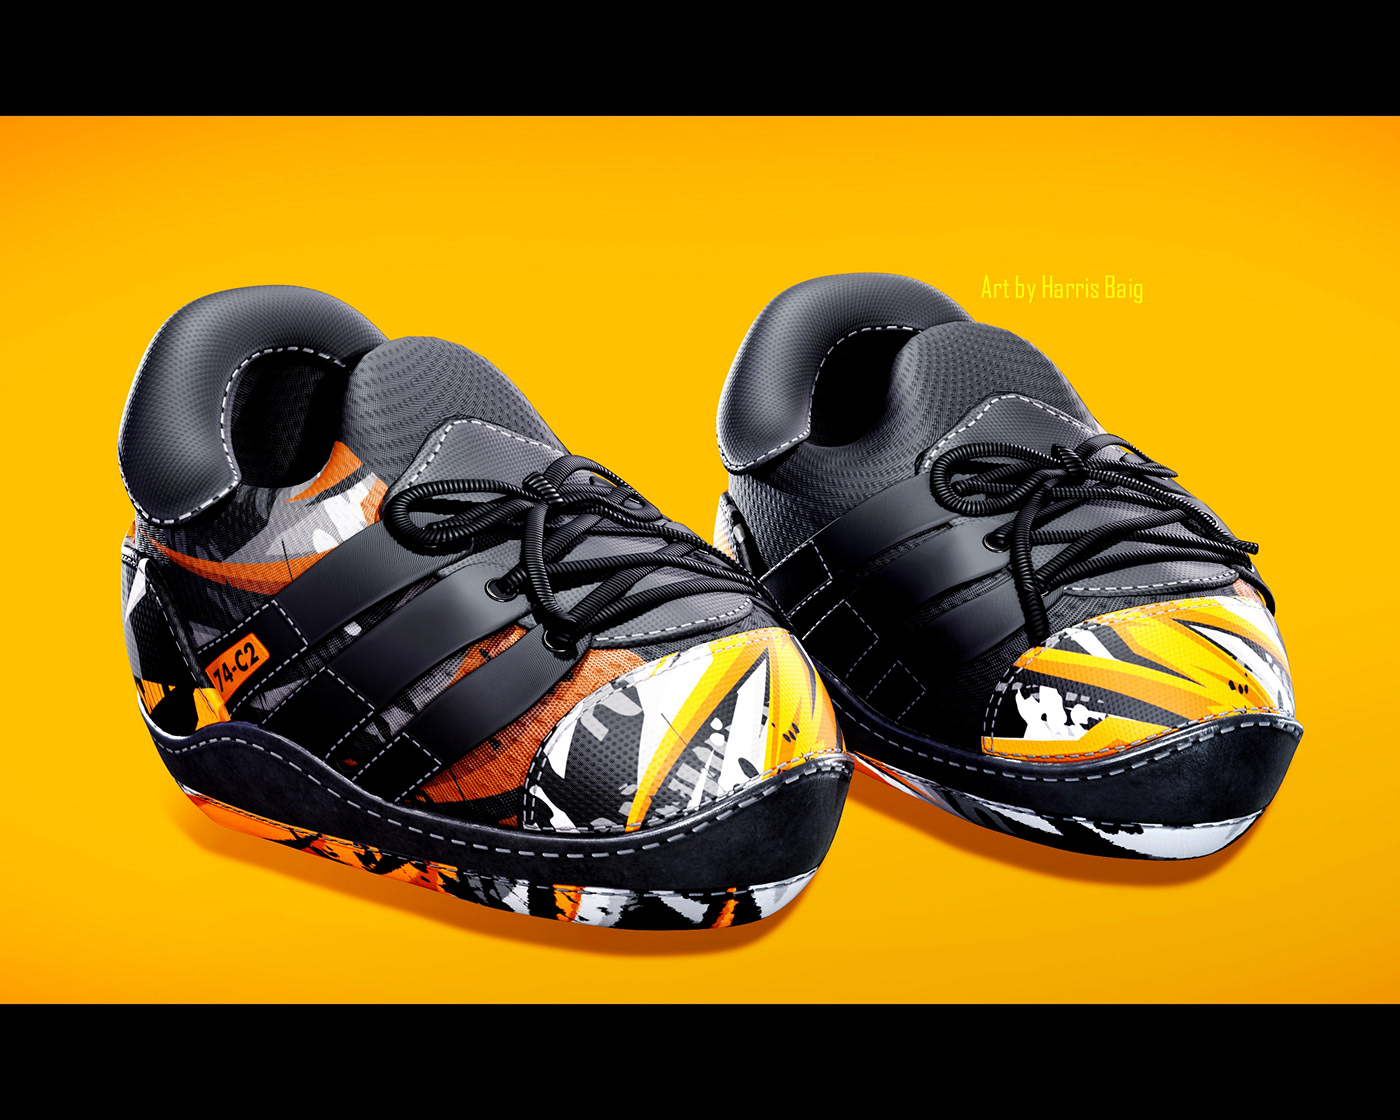 3D 3d modeling 3d modeling and rendering 3ds max digital3d haris haris baig Nike shoes Zbrush